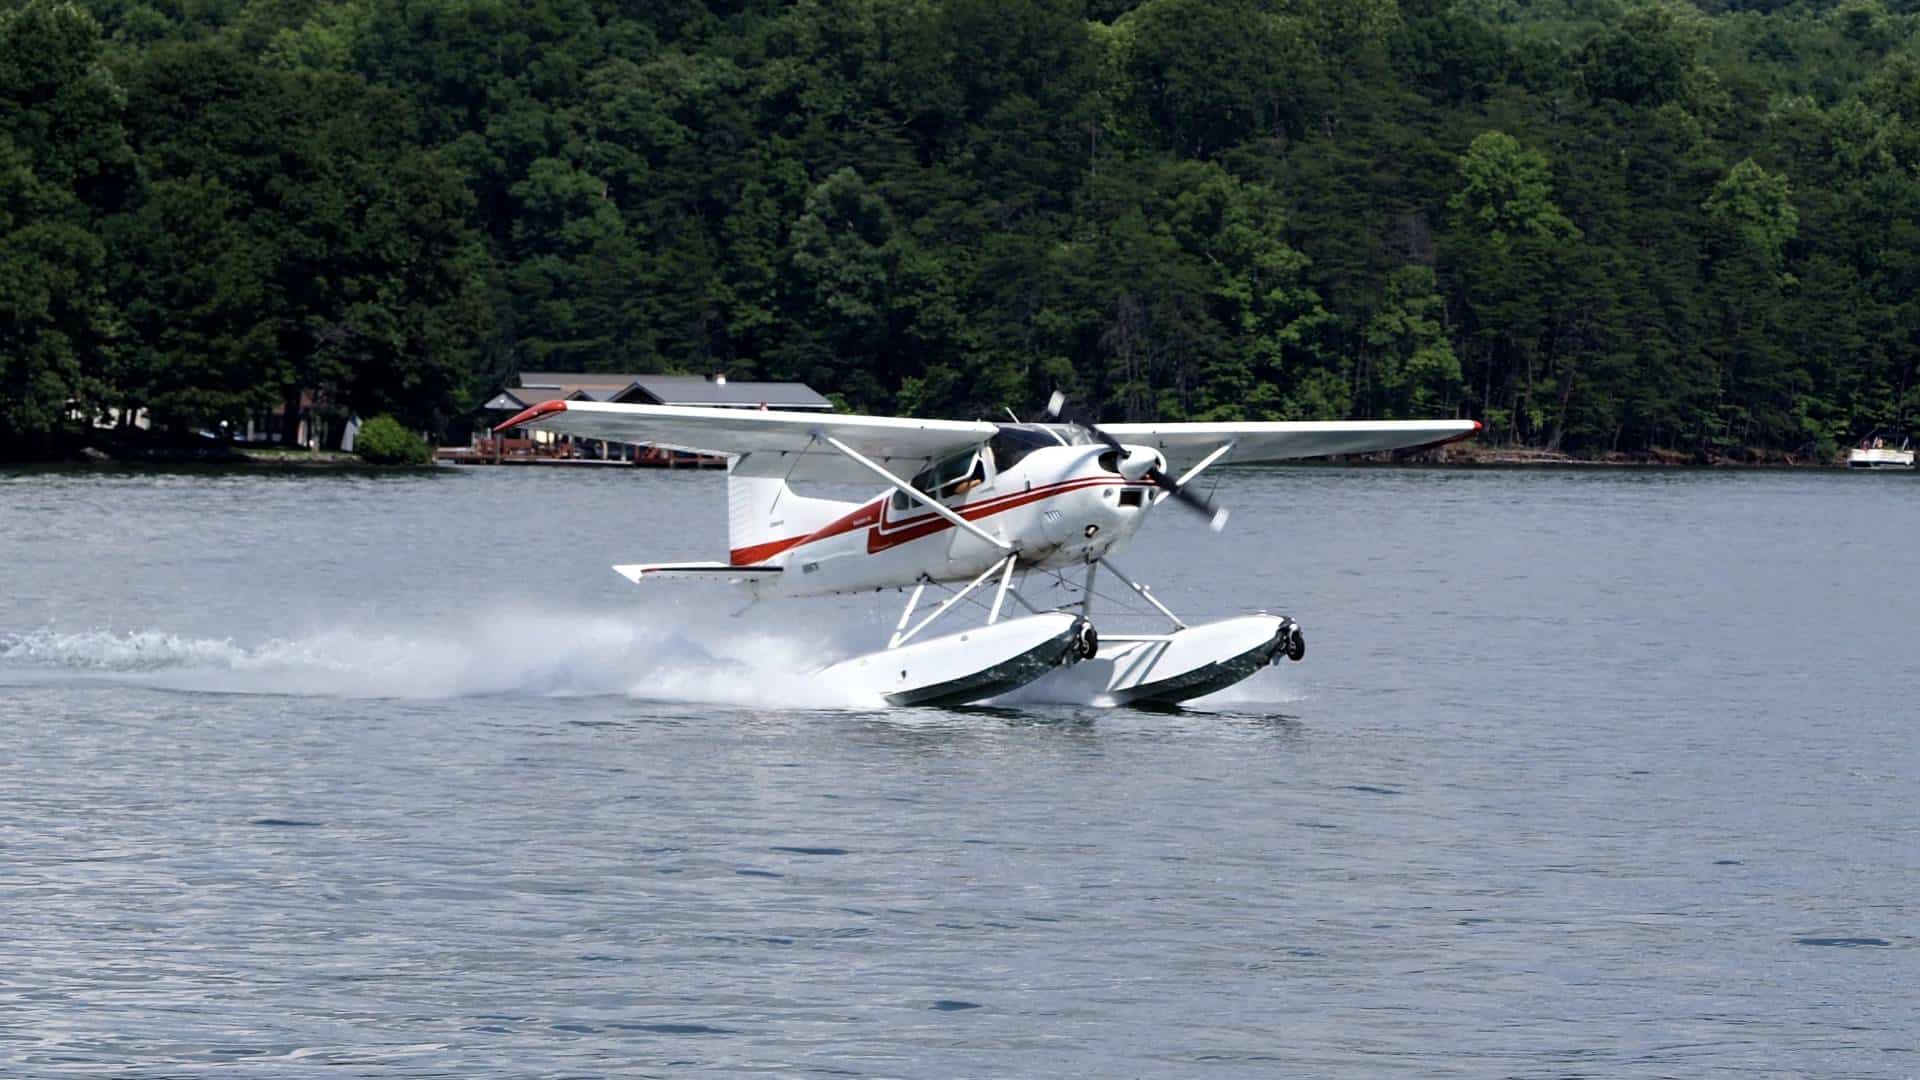 White with red stripe seaplane skimming the top of the water with large green trees in the background